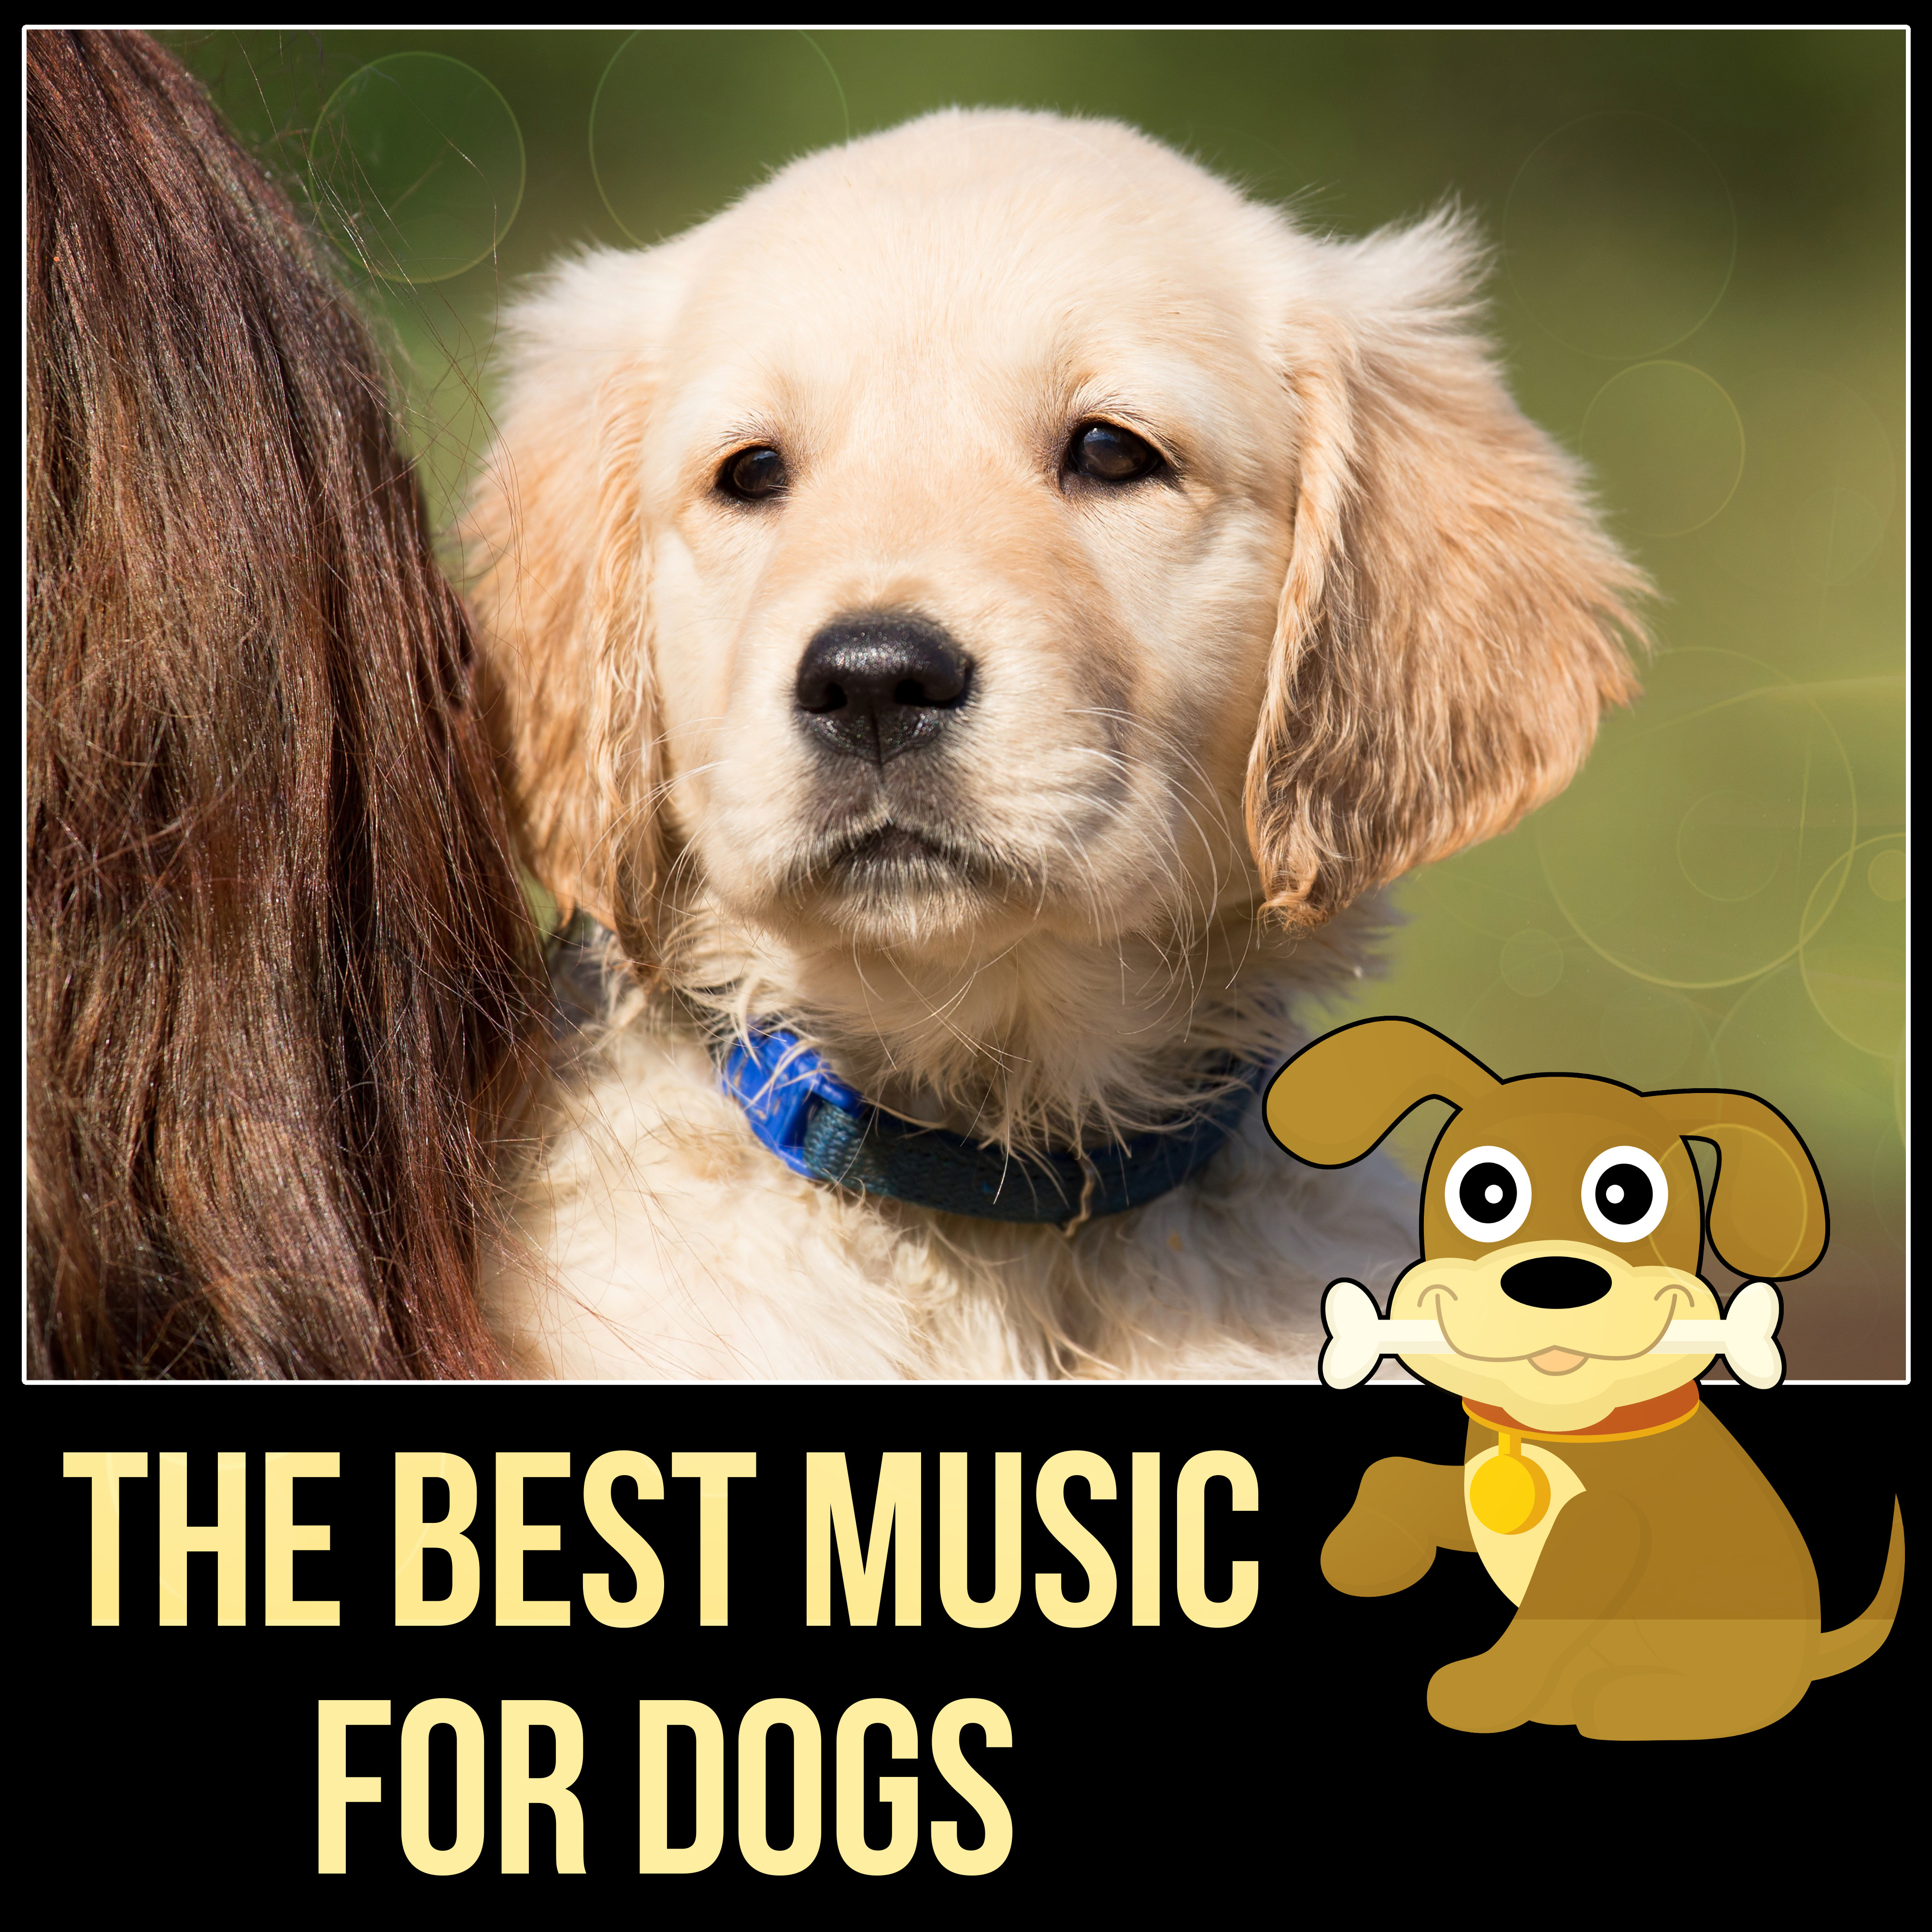 The Best Music for Dogs  Happy Animal, New Age Music for Puppy  Kitty, Music for Cats to Calm Down, Relaxing Music for Your Pet, Calm Your Anxious Dog, Nature Sounds for Relaxation